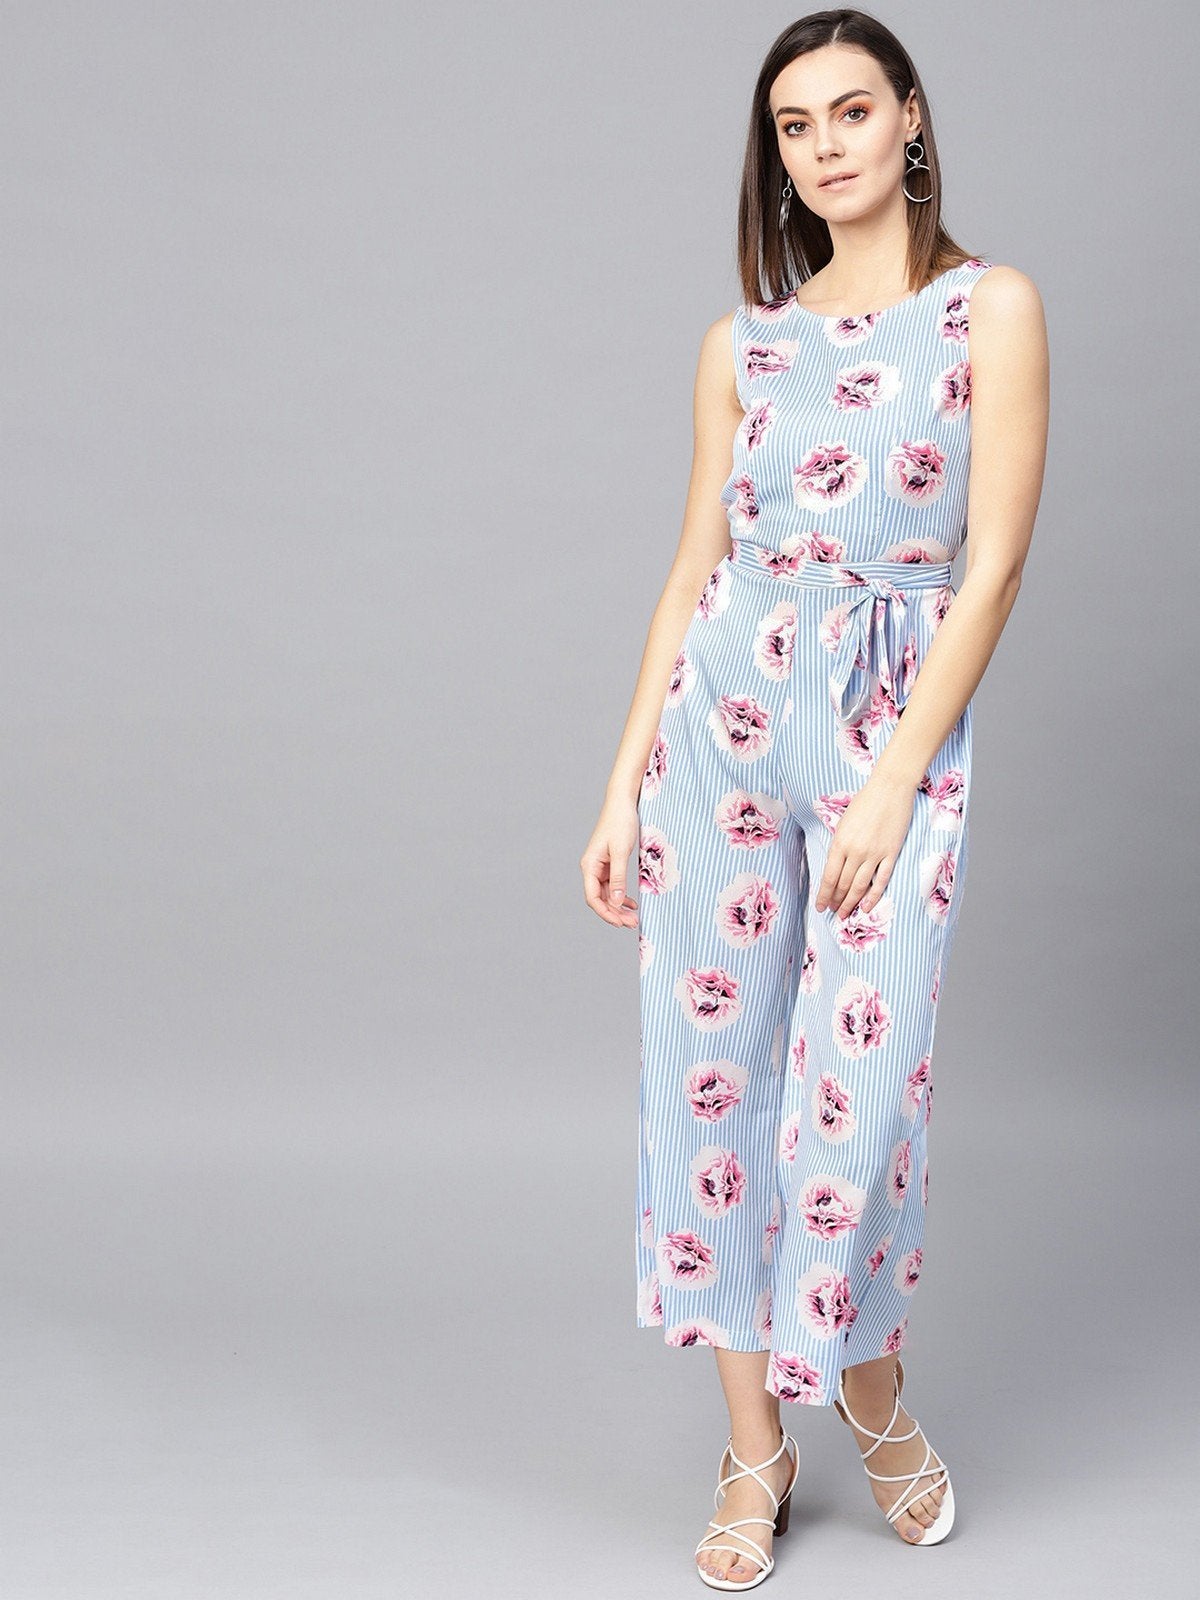 Women's Stripes And Floral Printed Jumpsuit - Pannkh